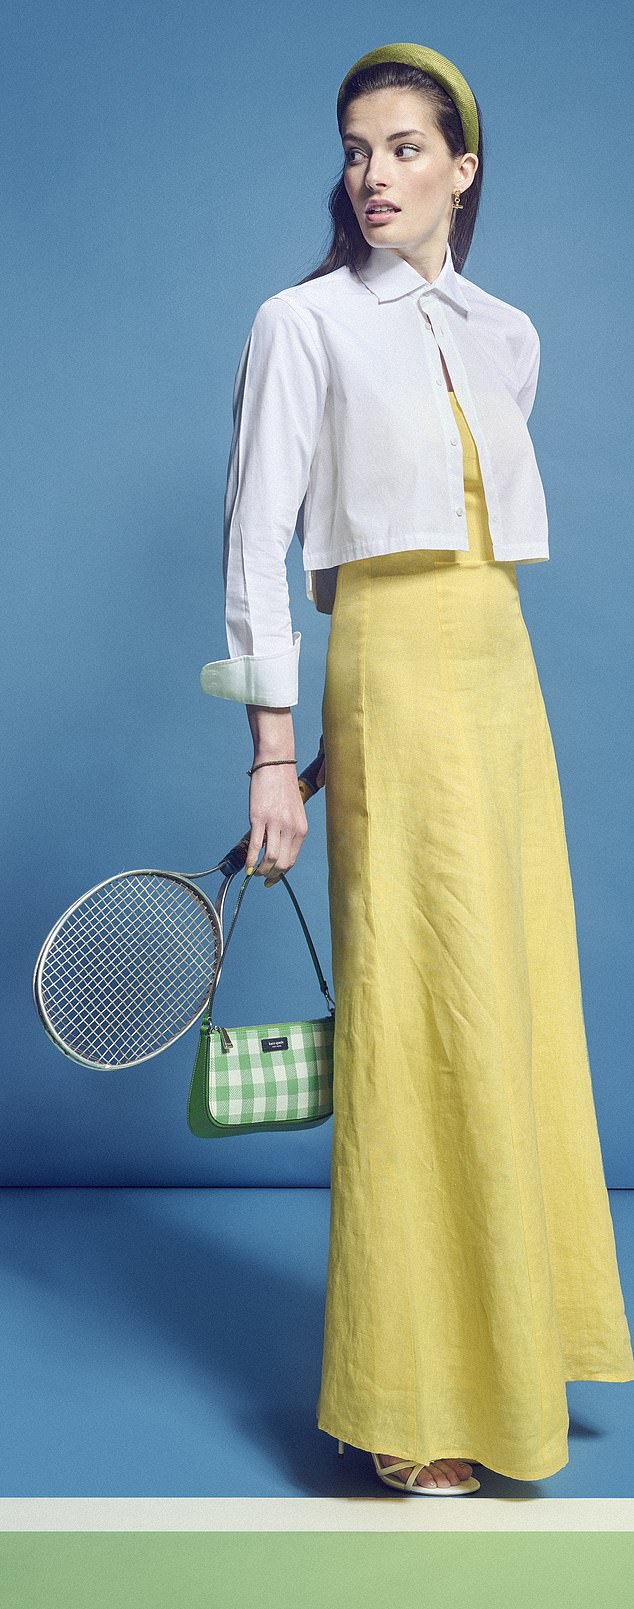 how to, how to serve up some centre court chic in your wardrobe